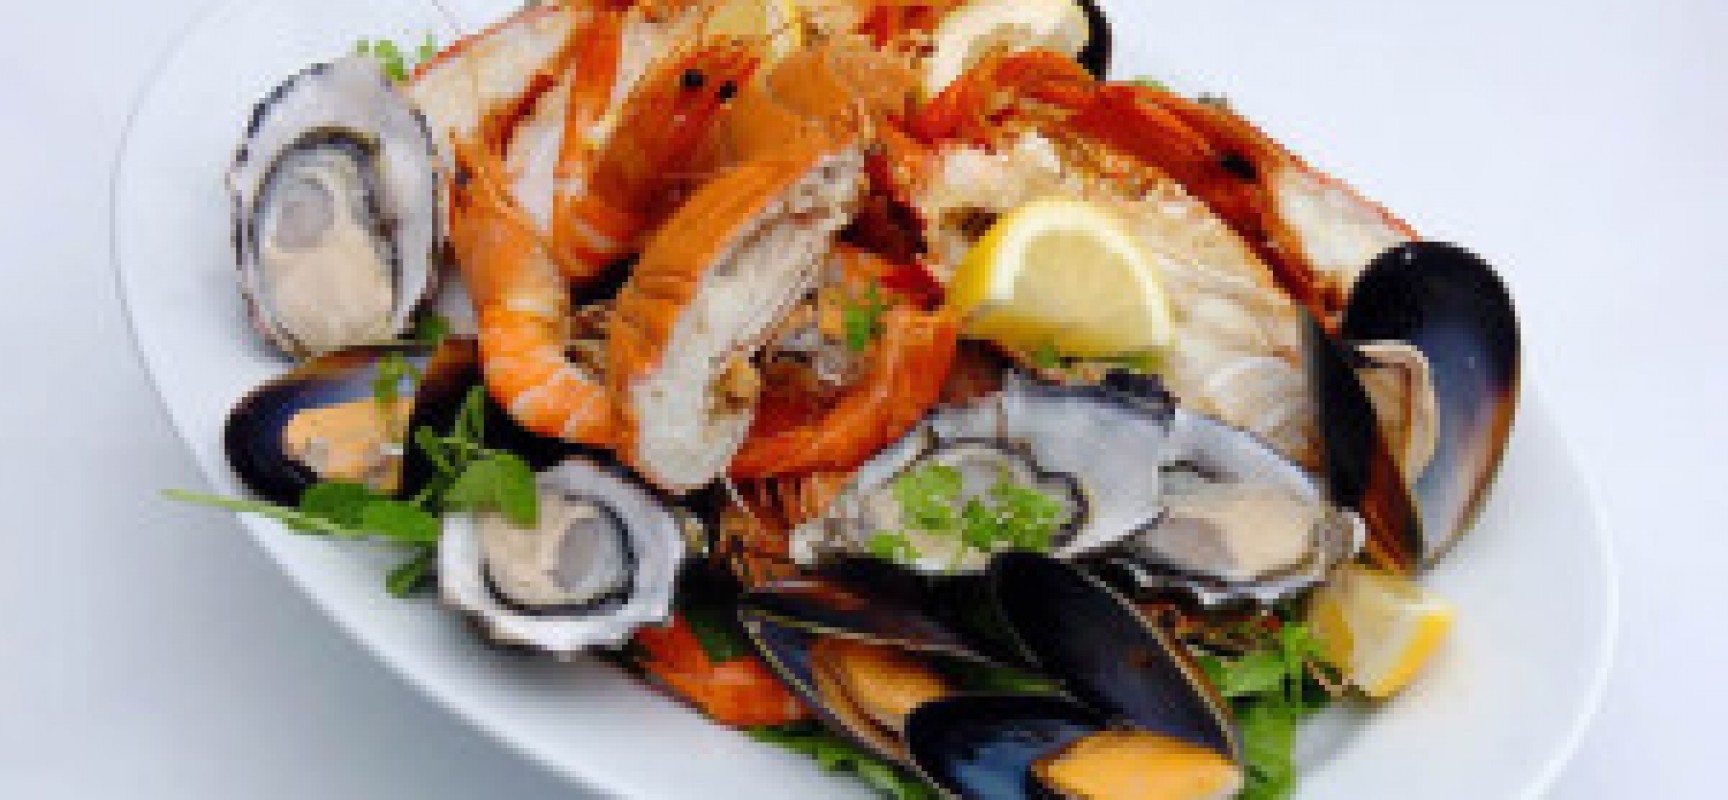 Seafood – new food to not shirk away from